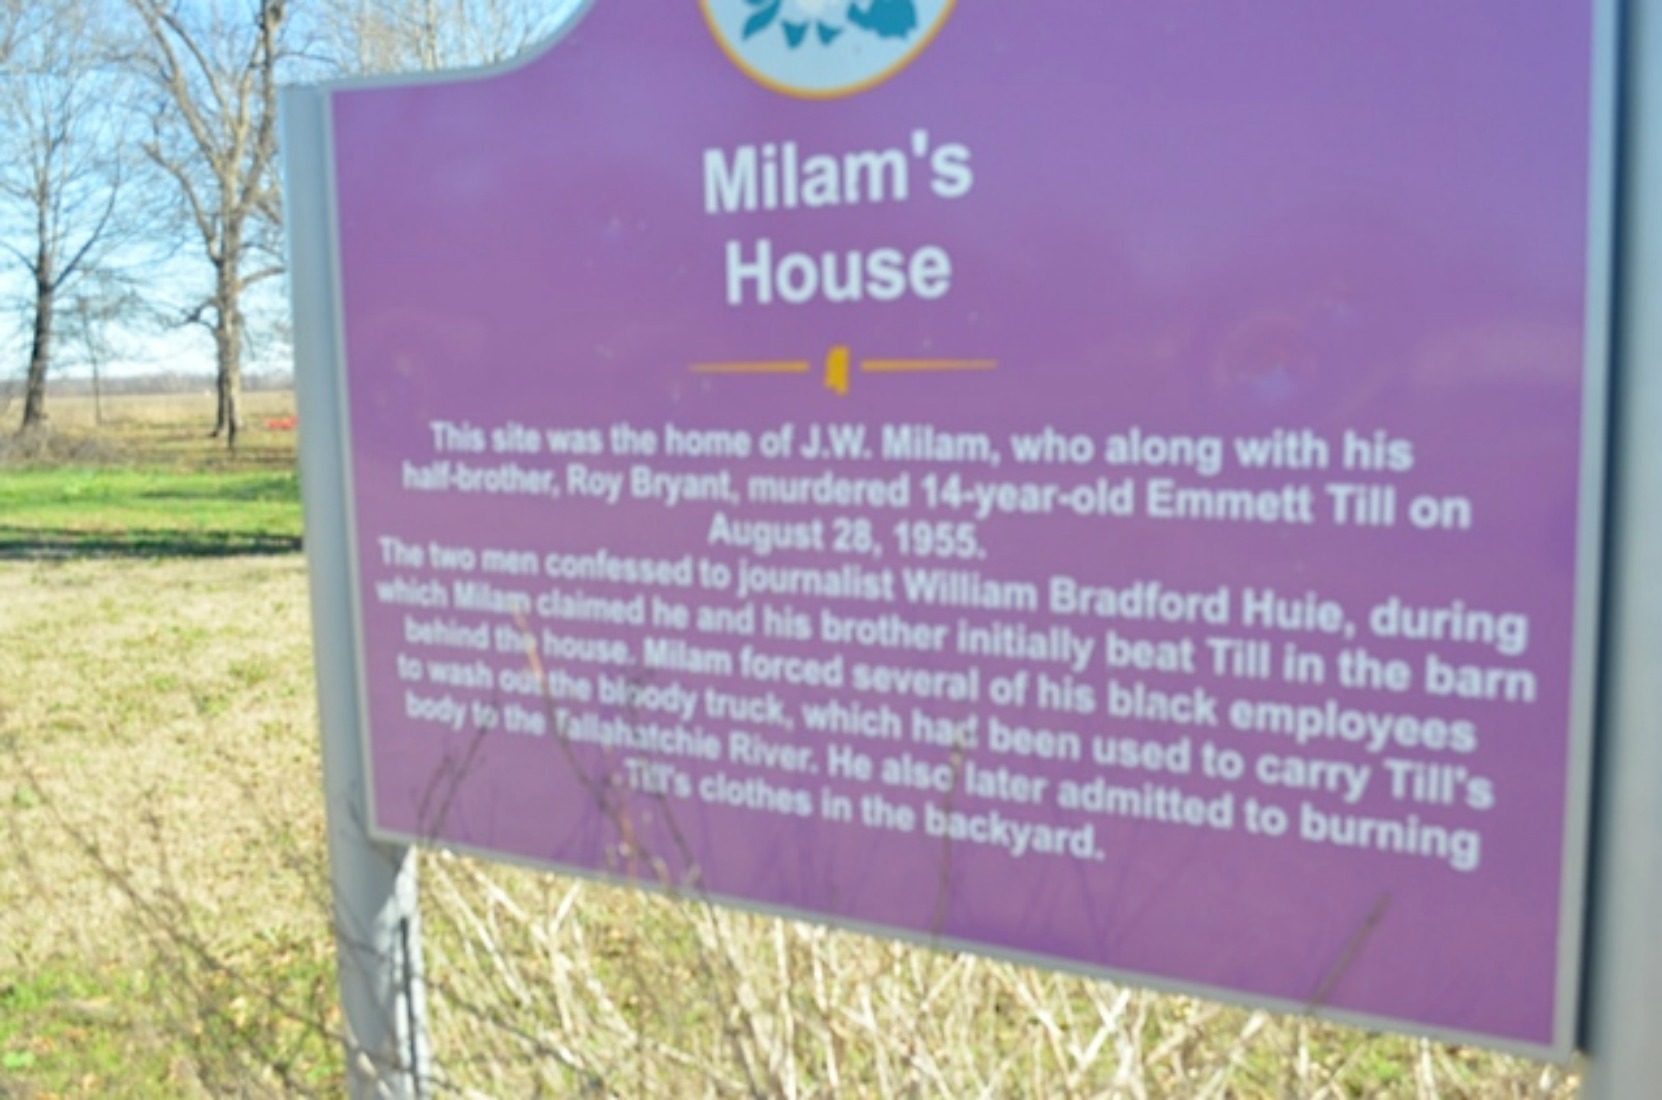 Milam's House sign, at the site of the former house of J.W. Milam, one of the two men who murdered Emmett Till in August 1955, Glendora, Mississippi (courtesy of Keith Petersen)